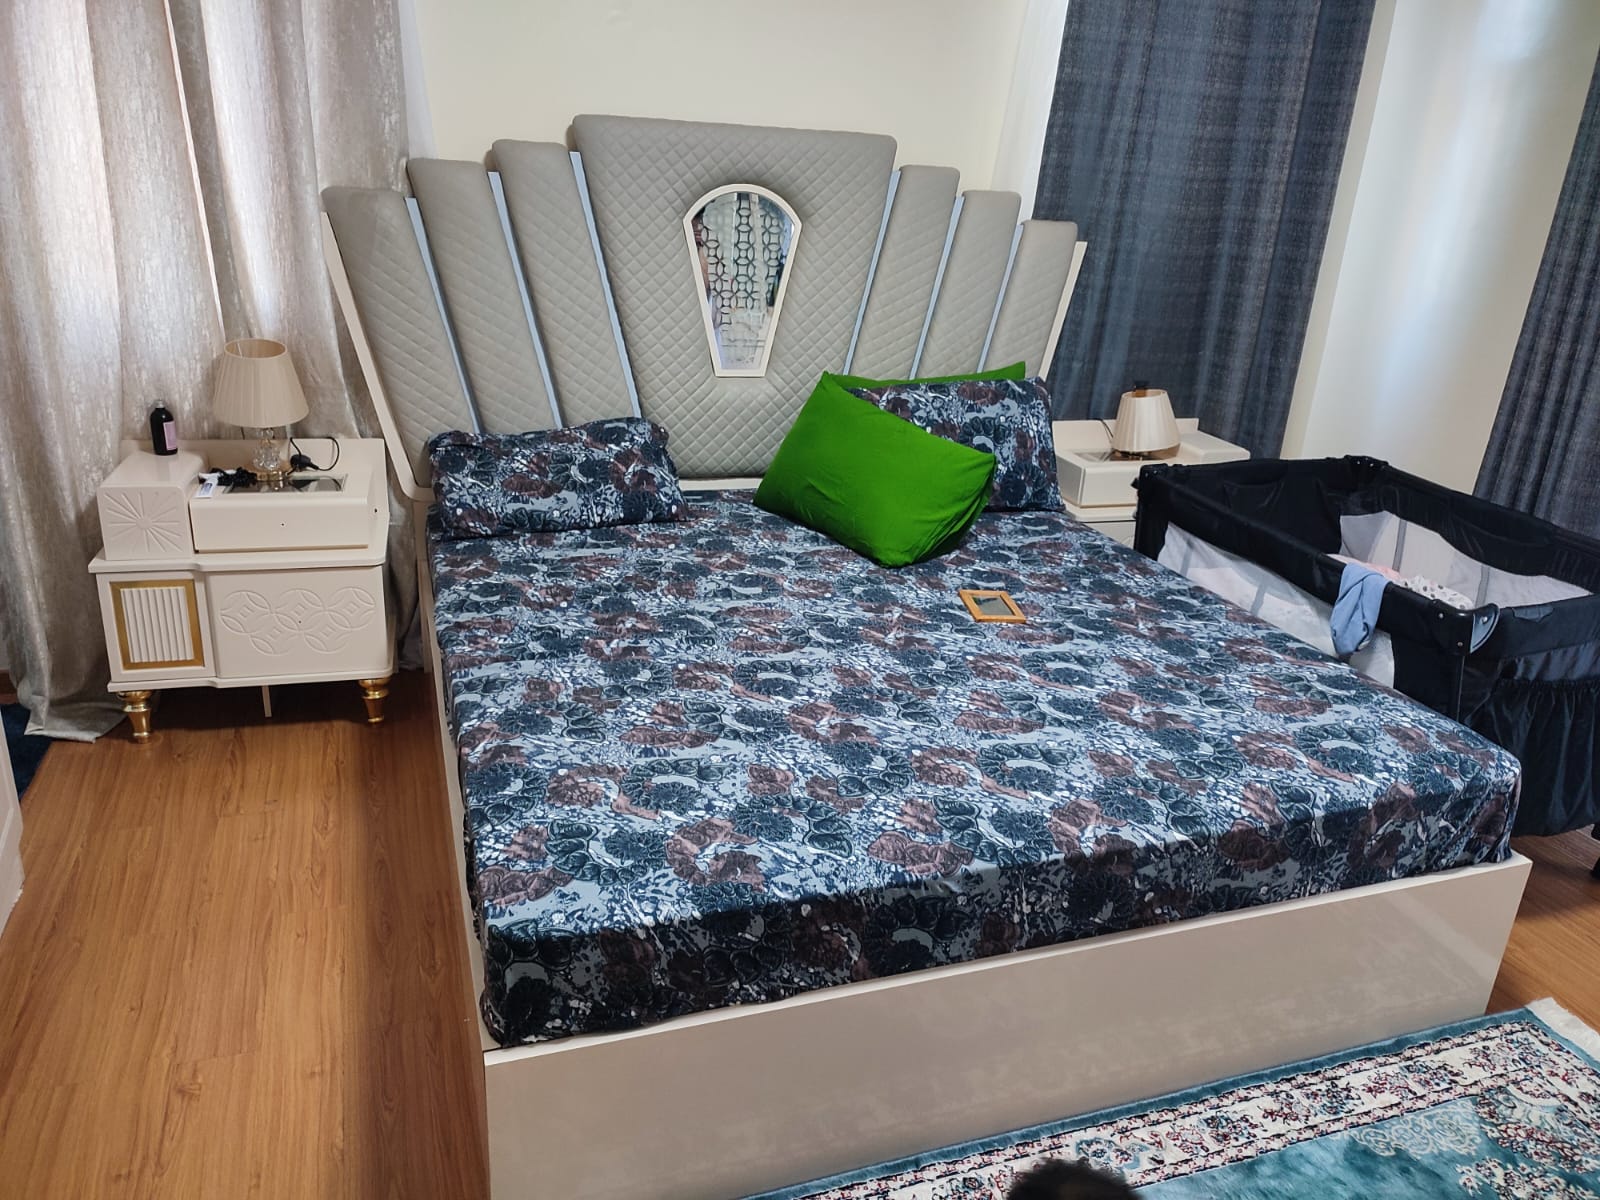 Queen Size 6 by 6 Bed With Mattress 